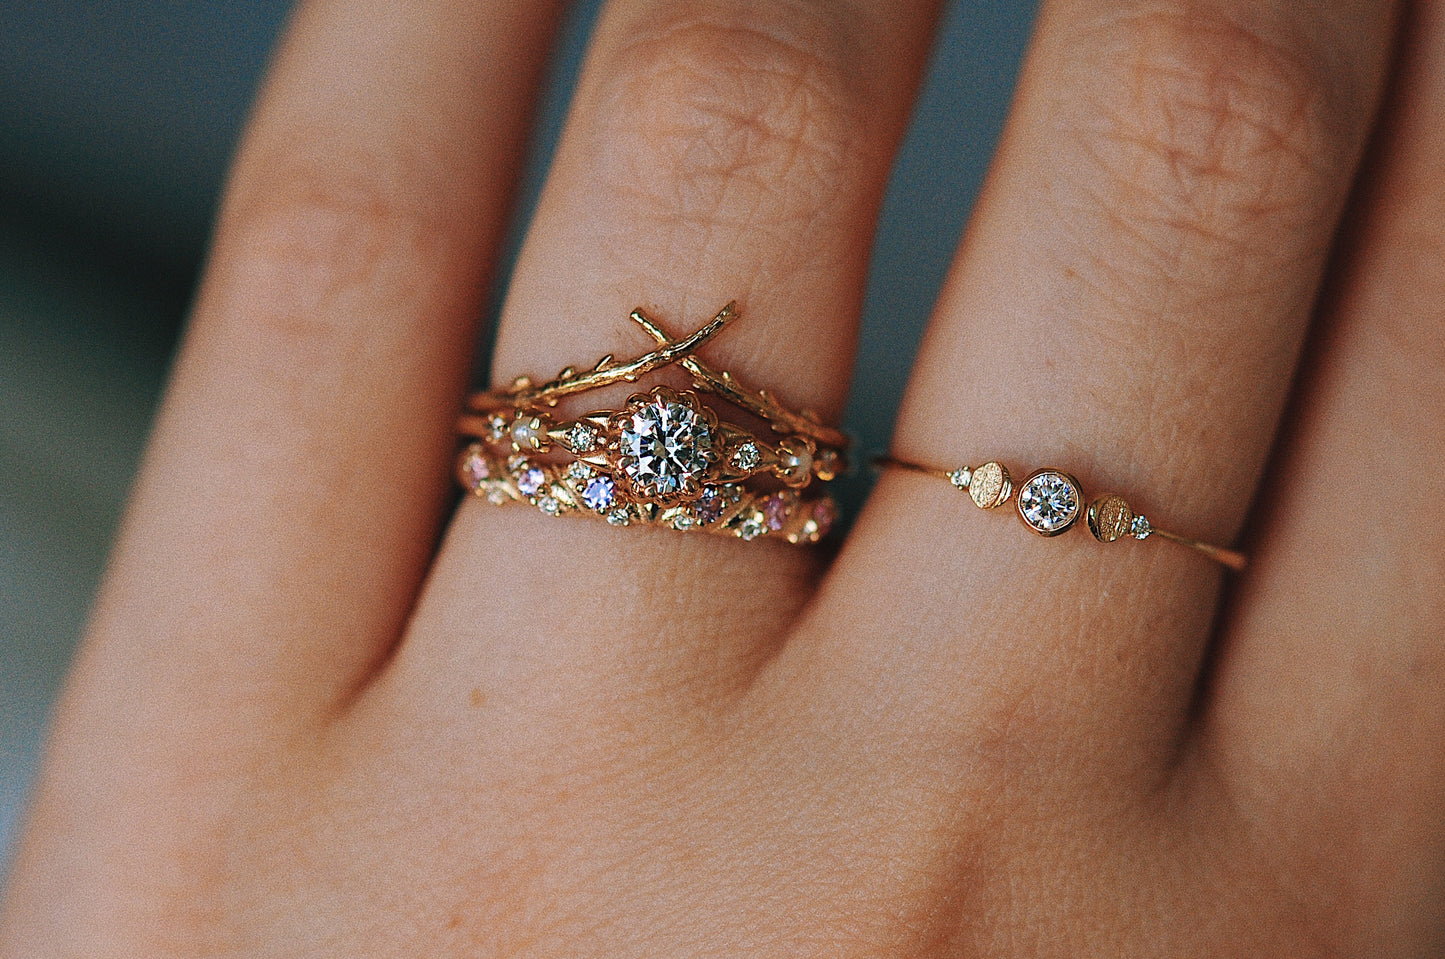 Baby Cosmic Witch Ring